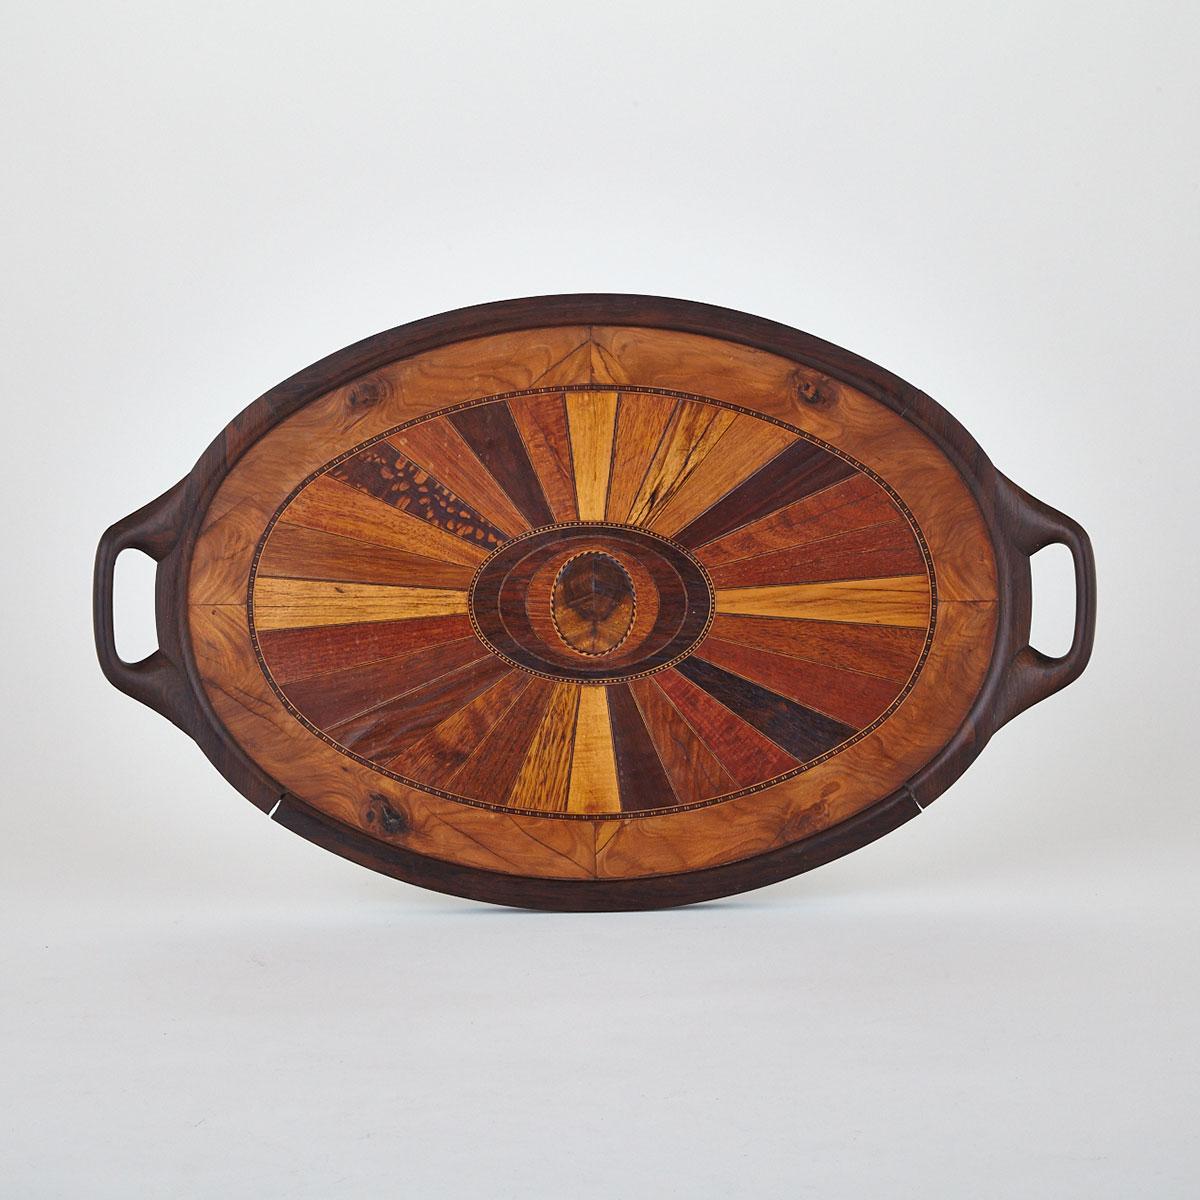 Specimen Wood Parquetry Inlaid Tea Tray, early-mid 20th century